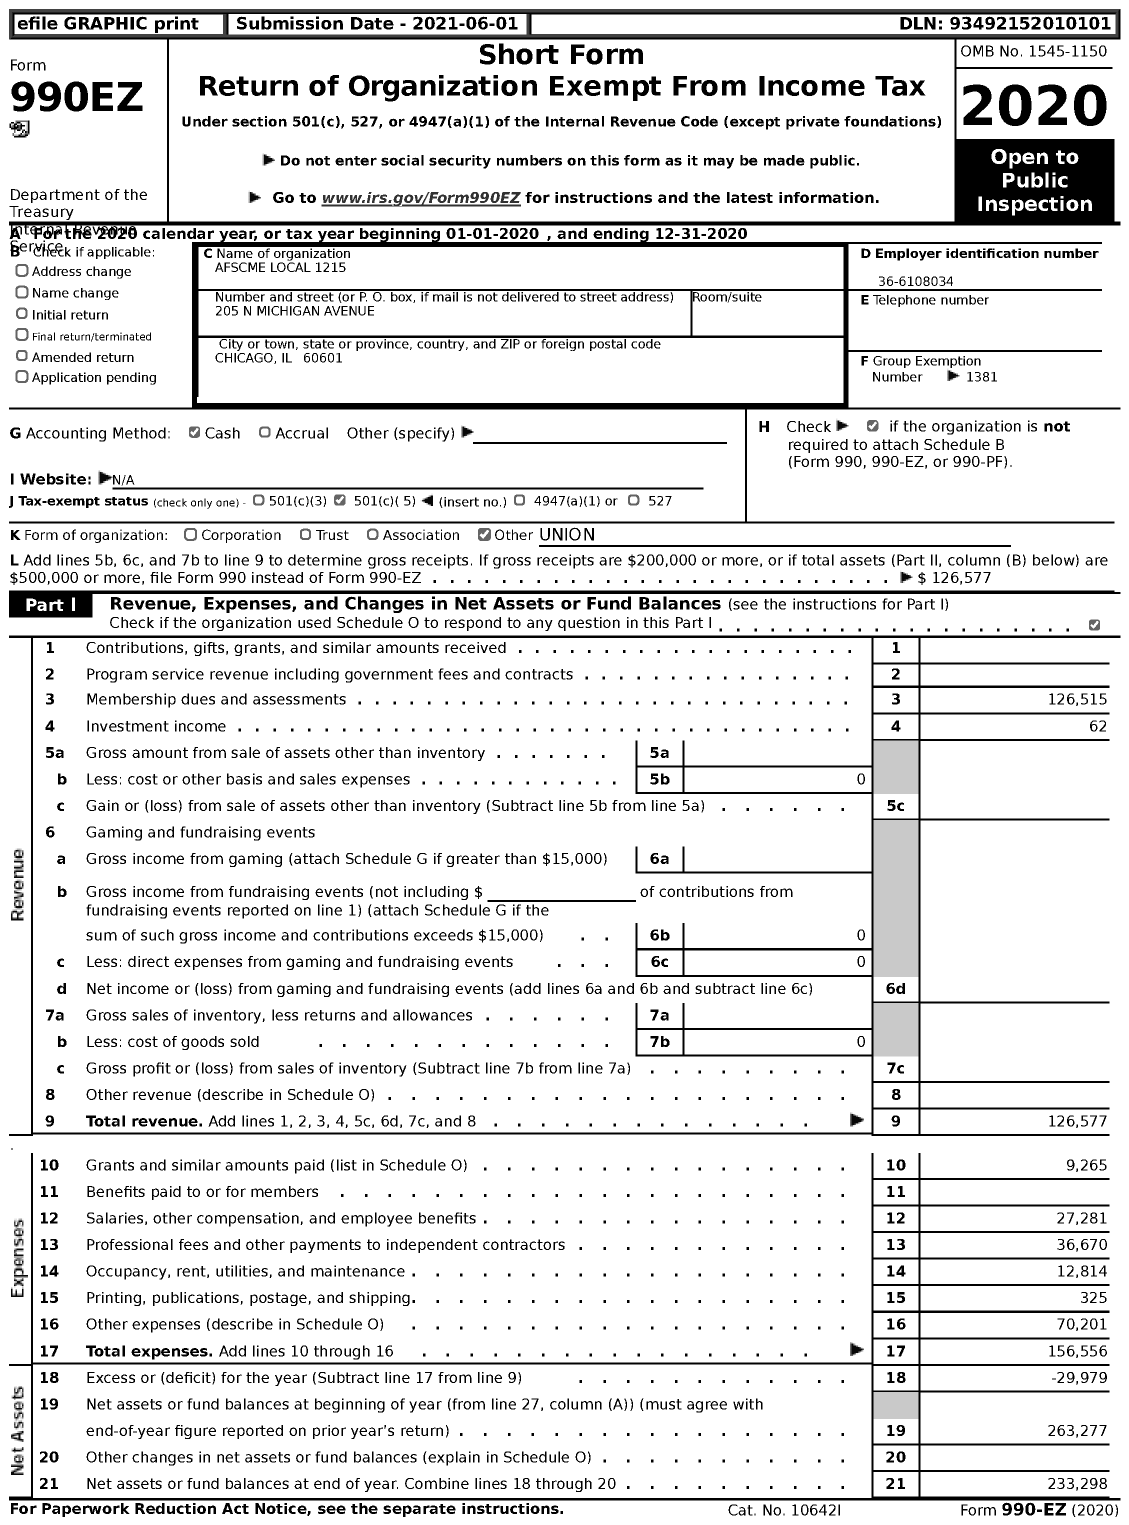 Image of first page of 2020 Form 990EZ for AFSCME Local 1215